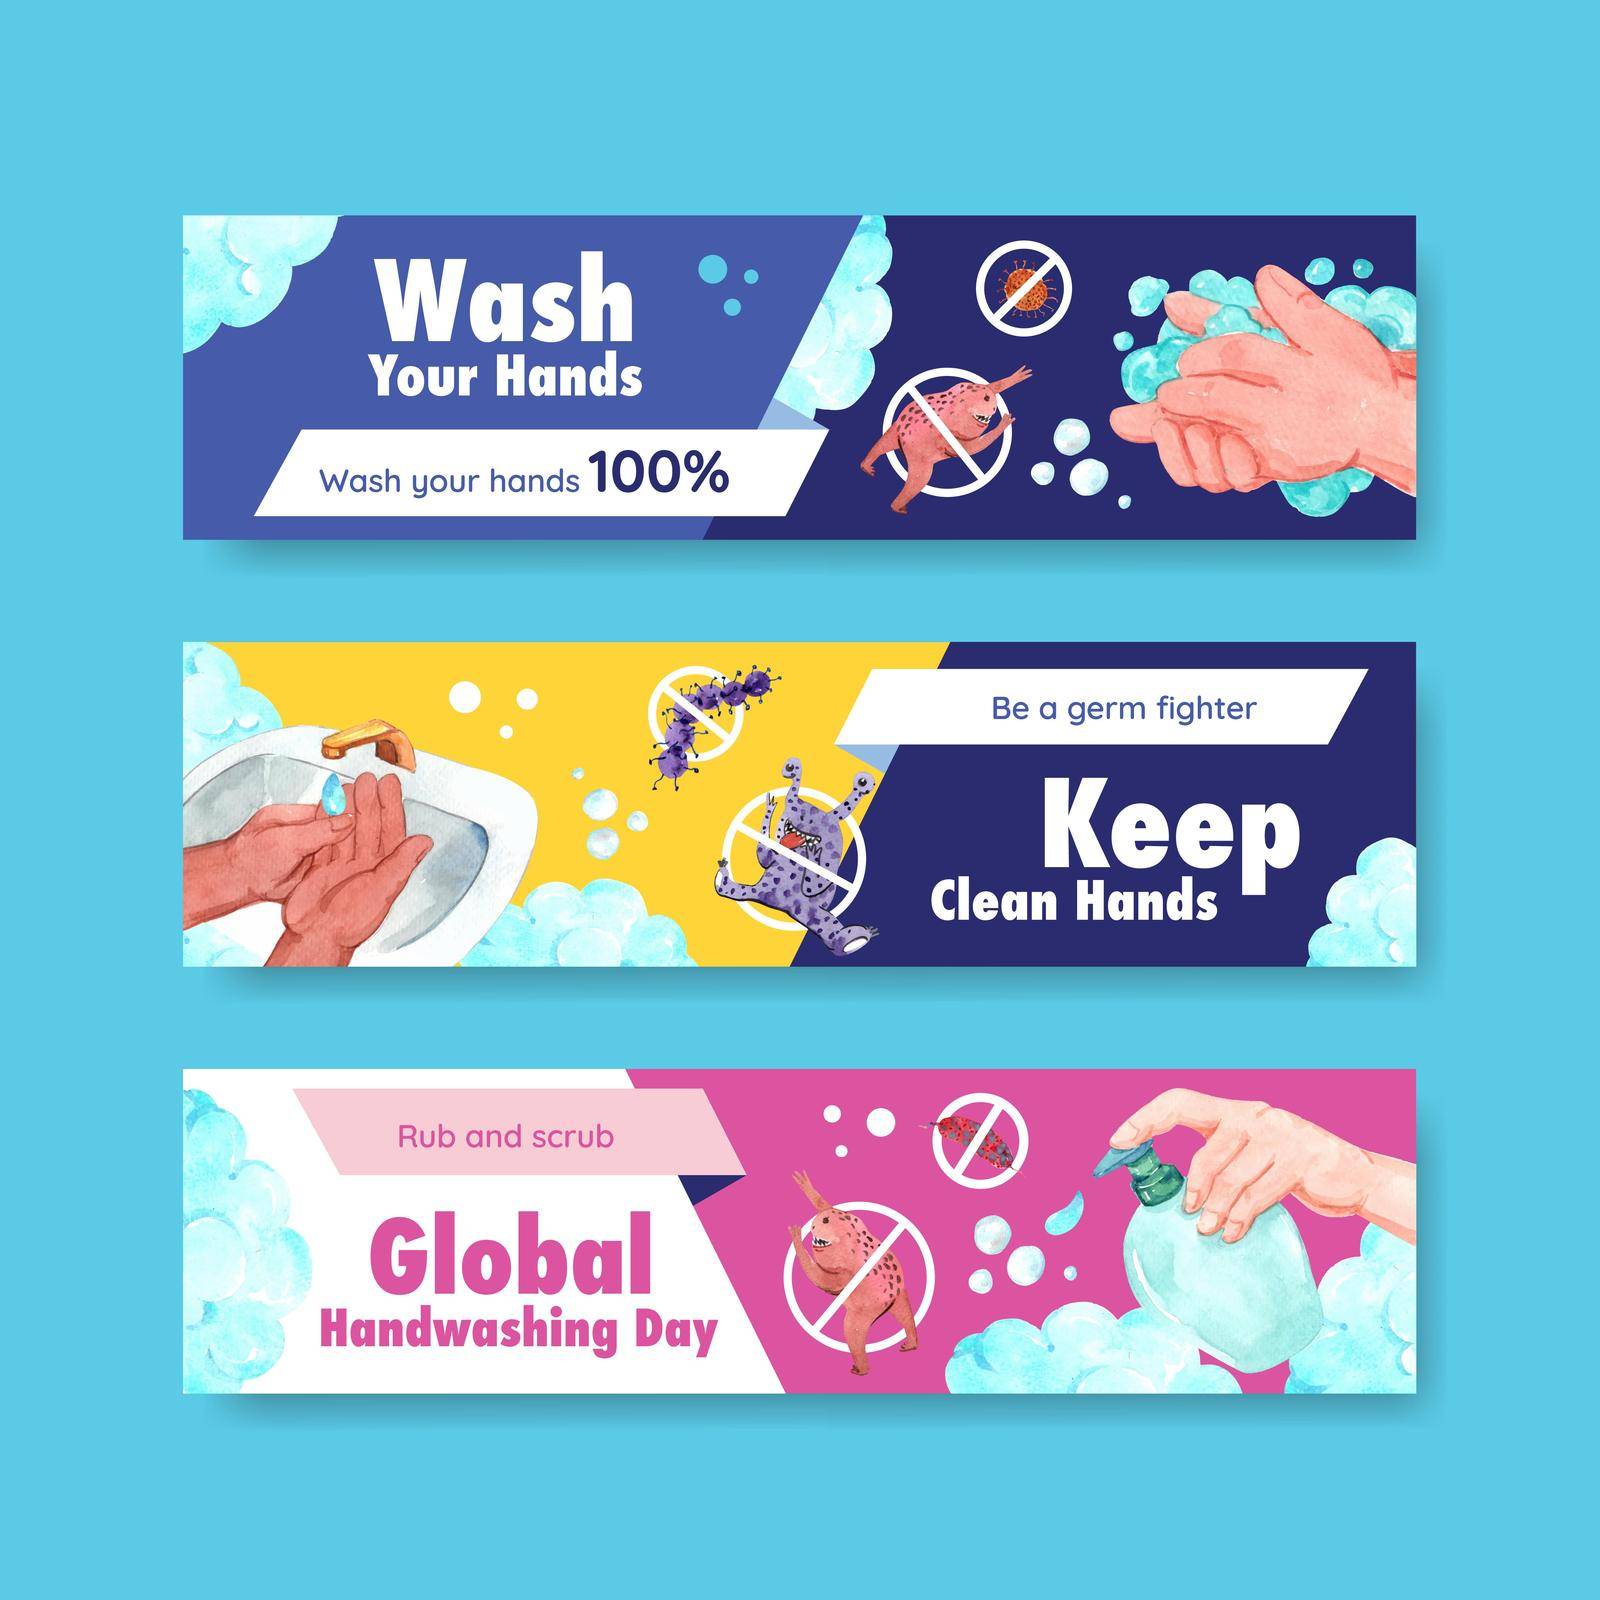 Banner template with global handwashing day concept design for advertise and marketing watercolor vector